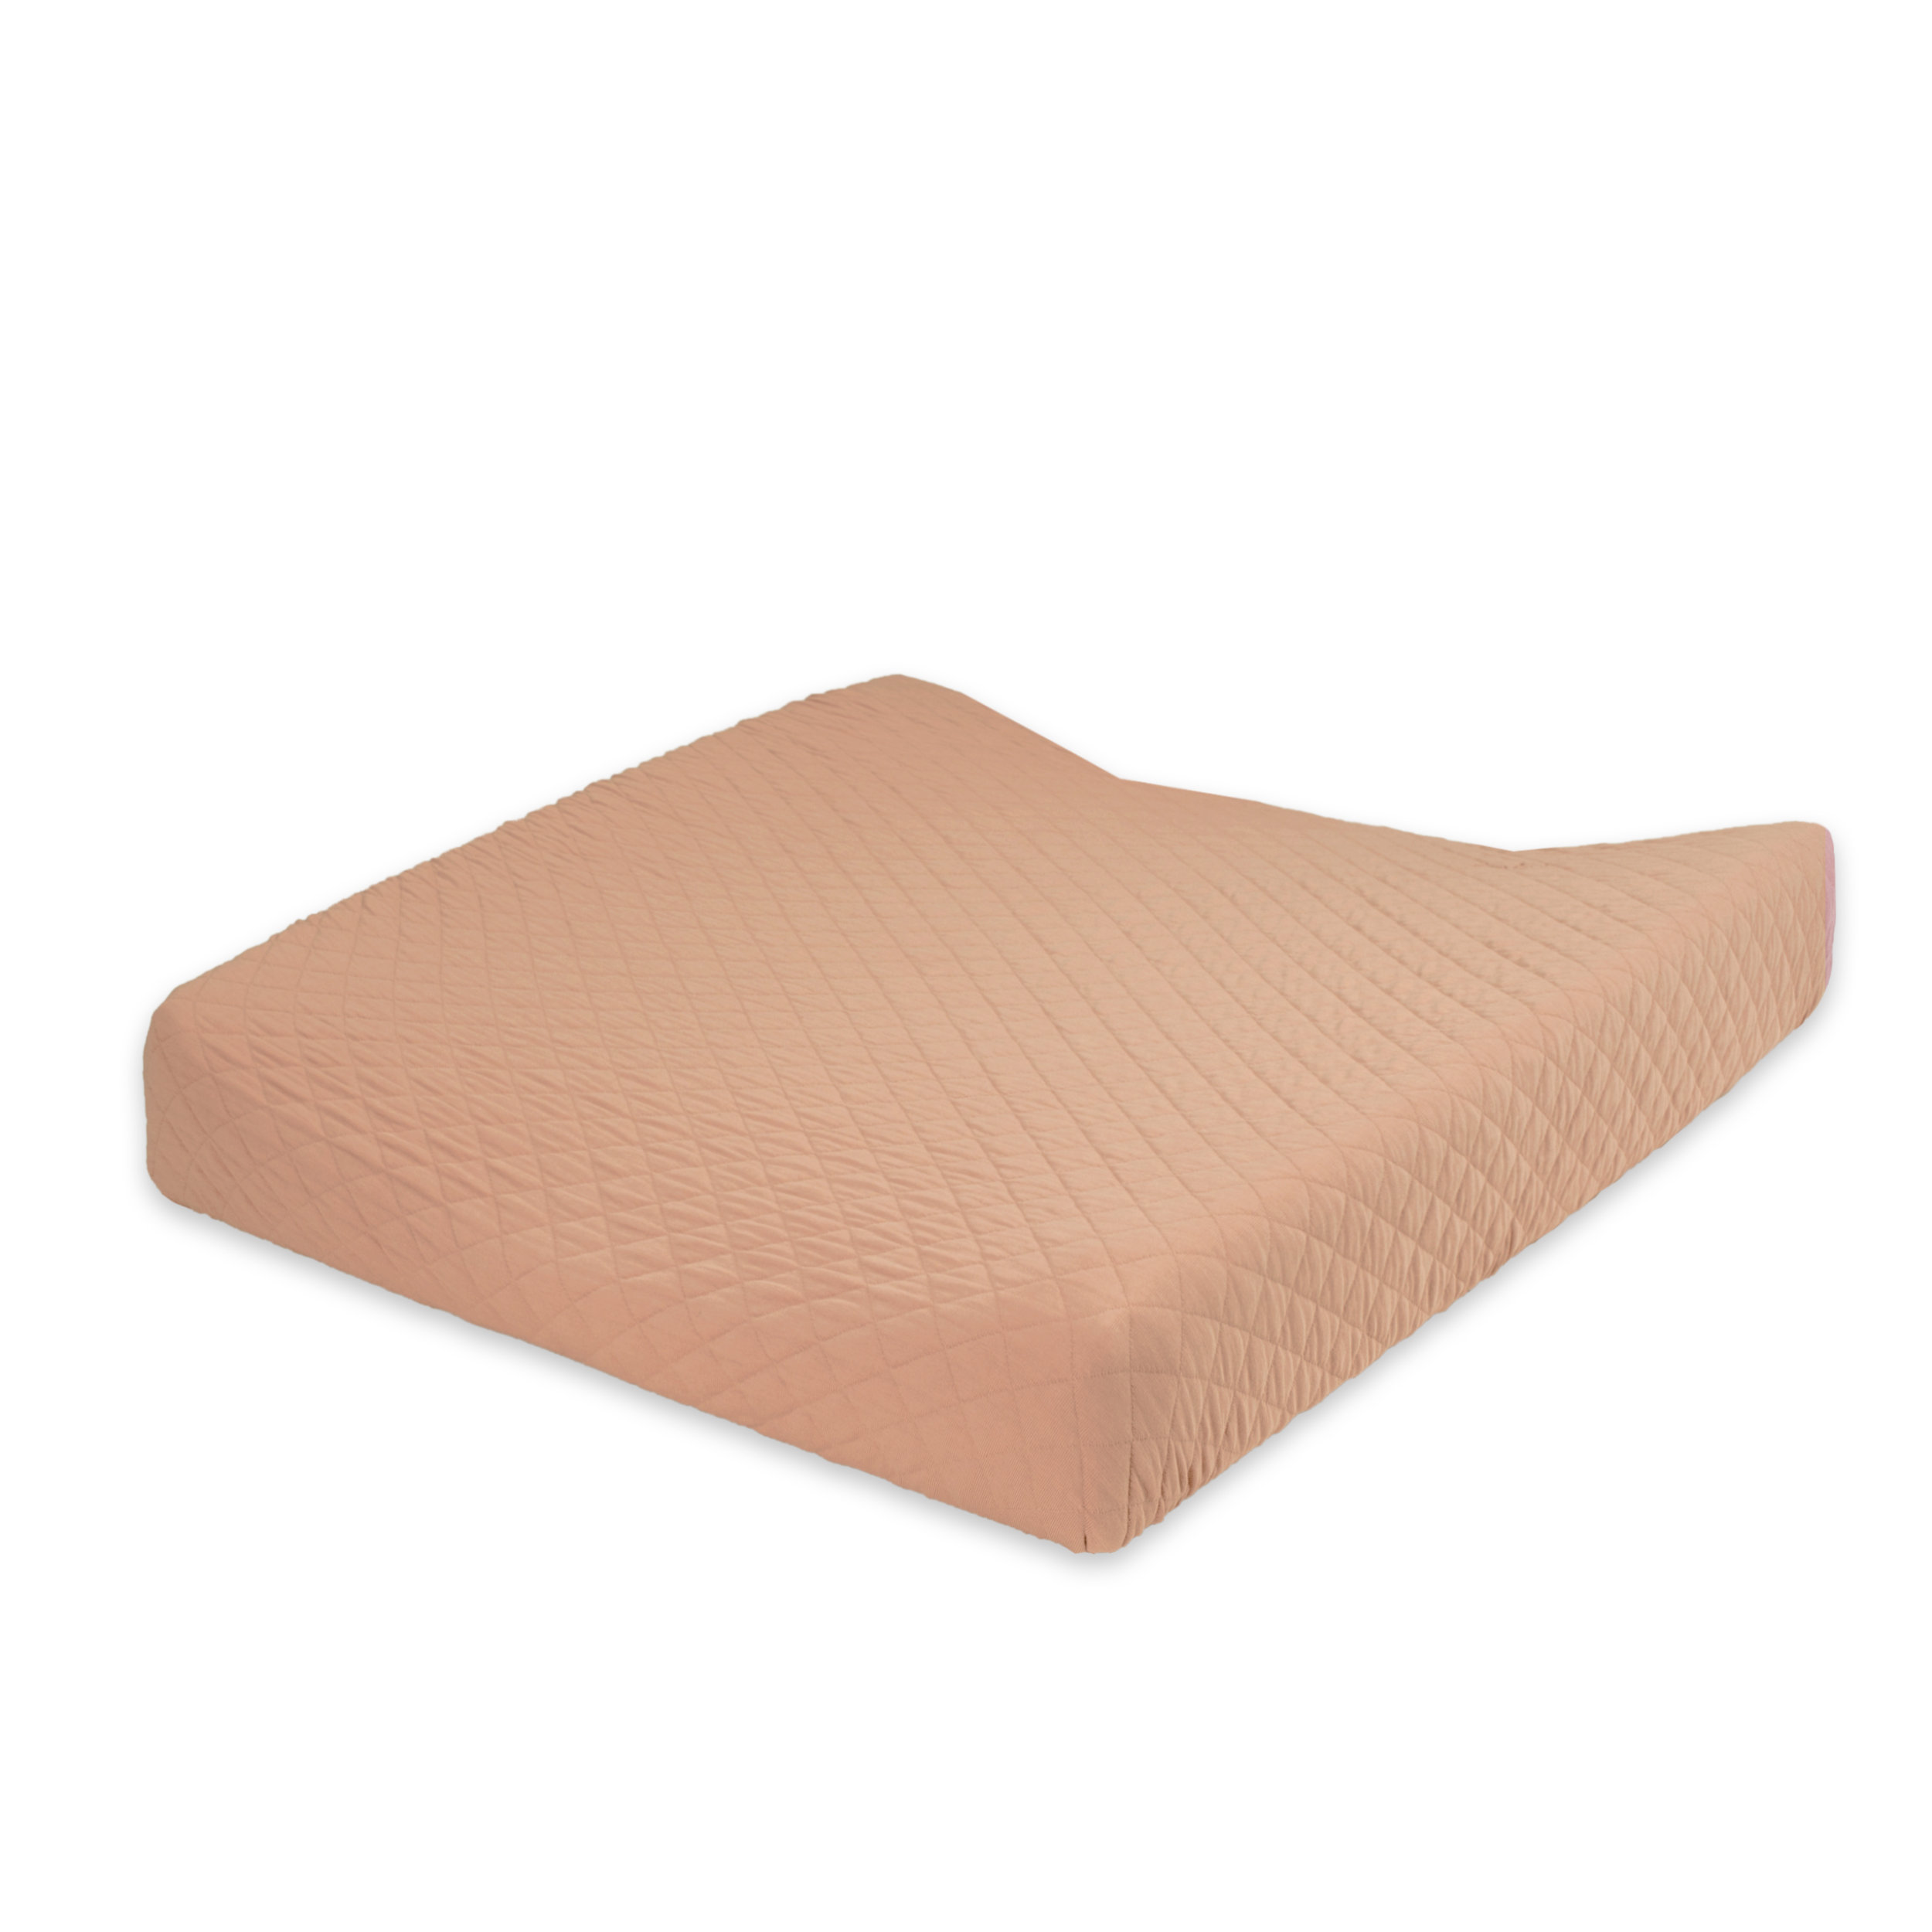 Changing mat cover Pady quilted jersey 50x75cm QUILT Beige